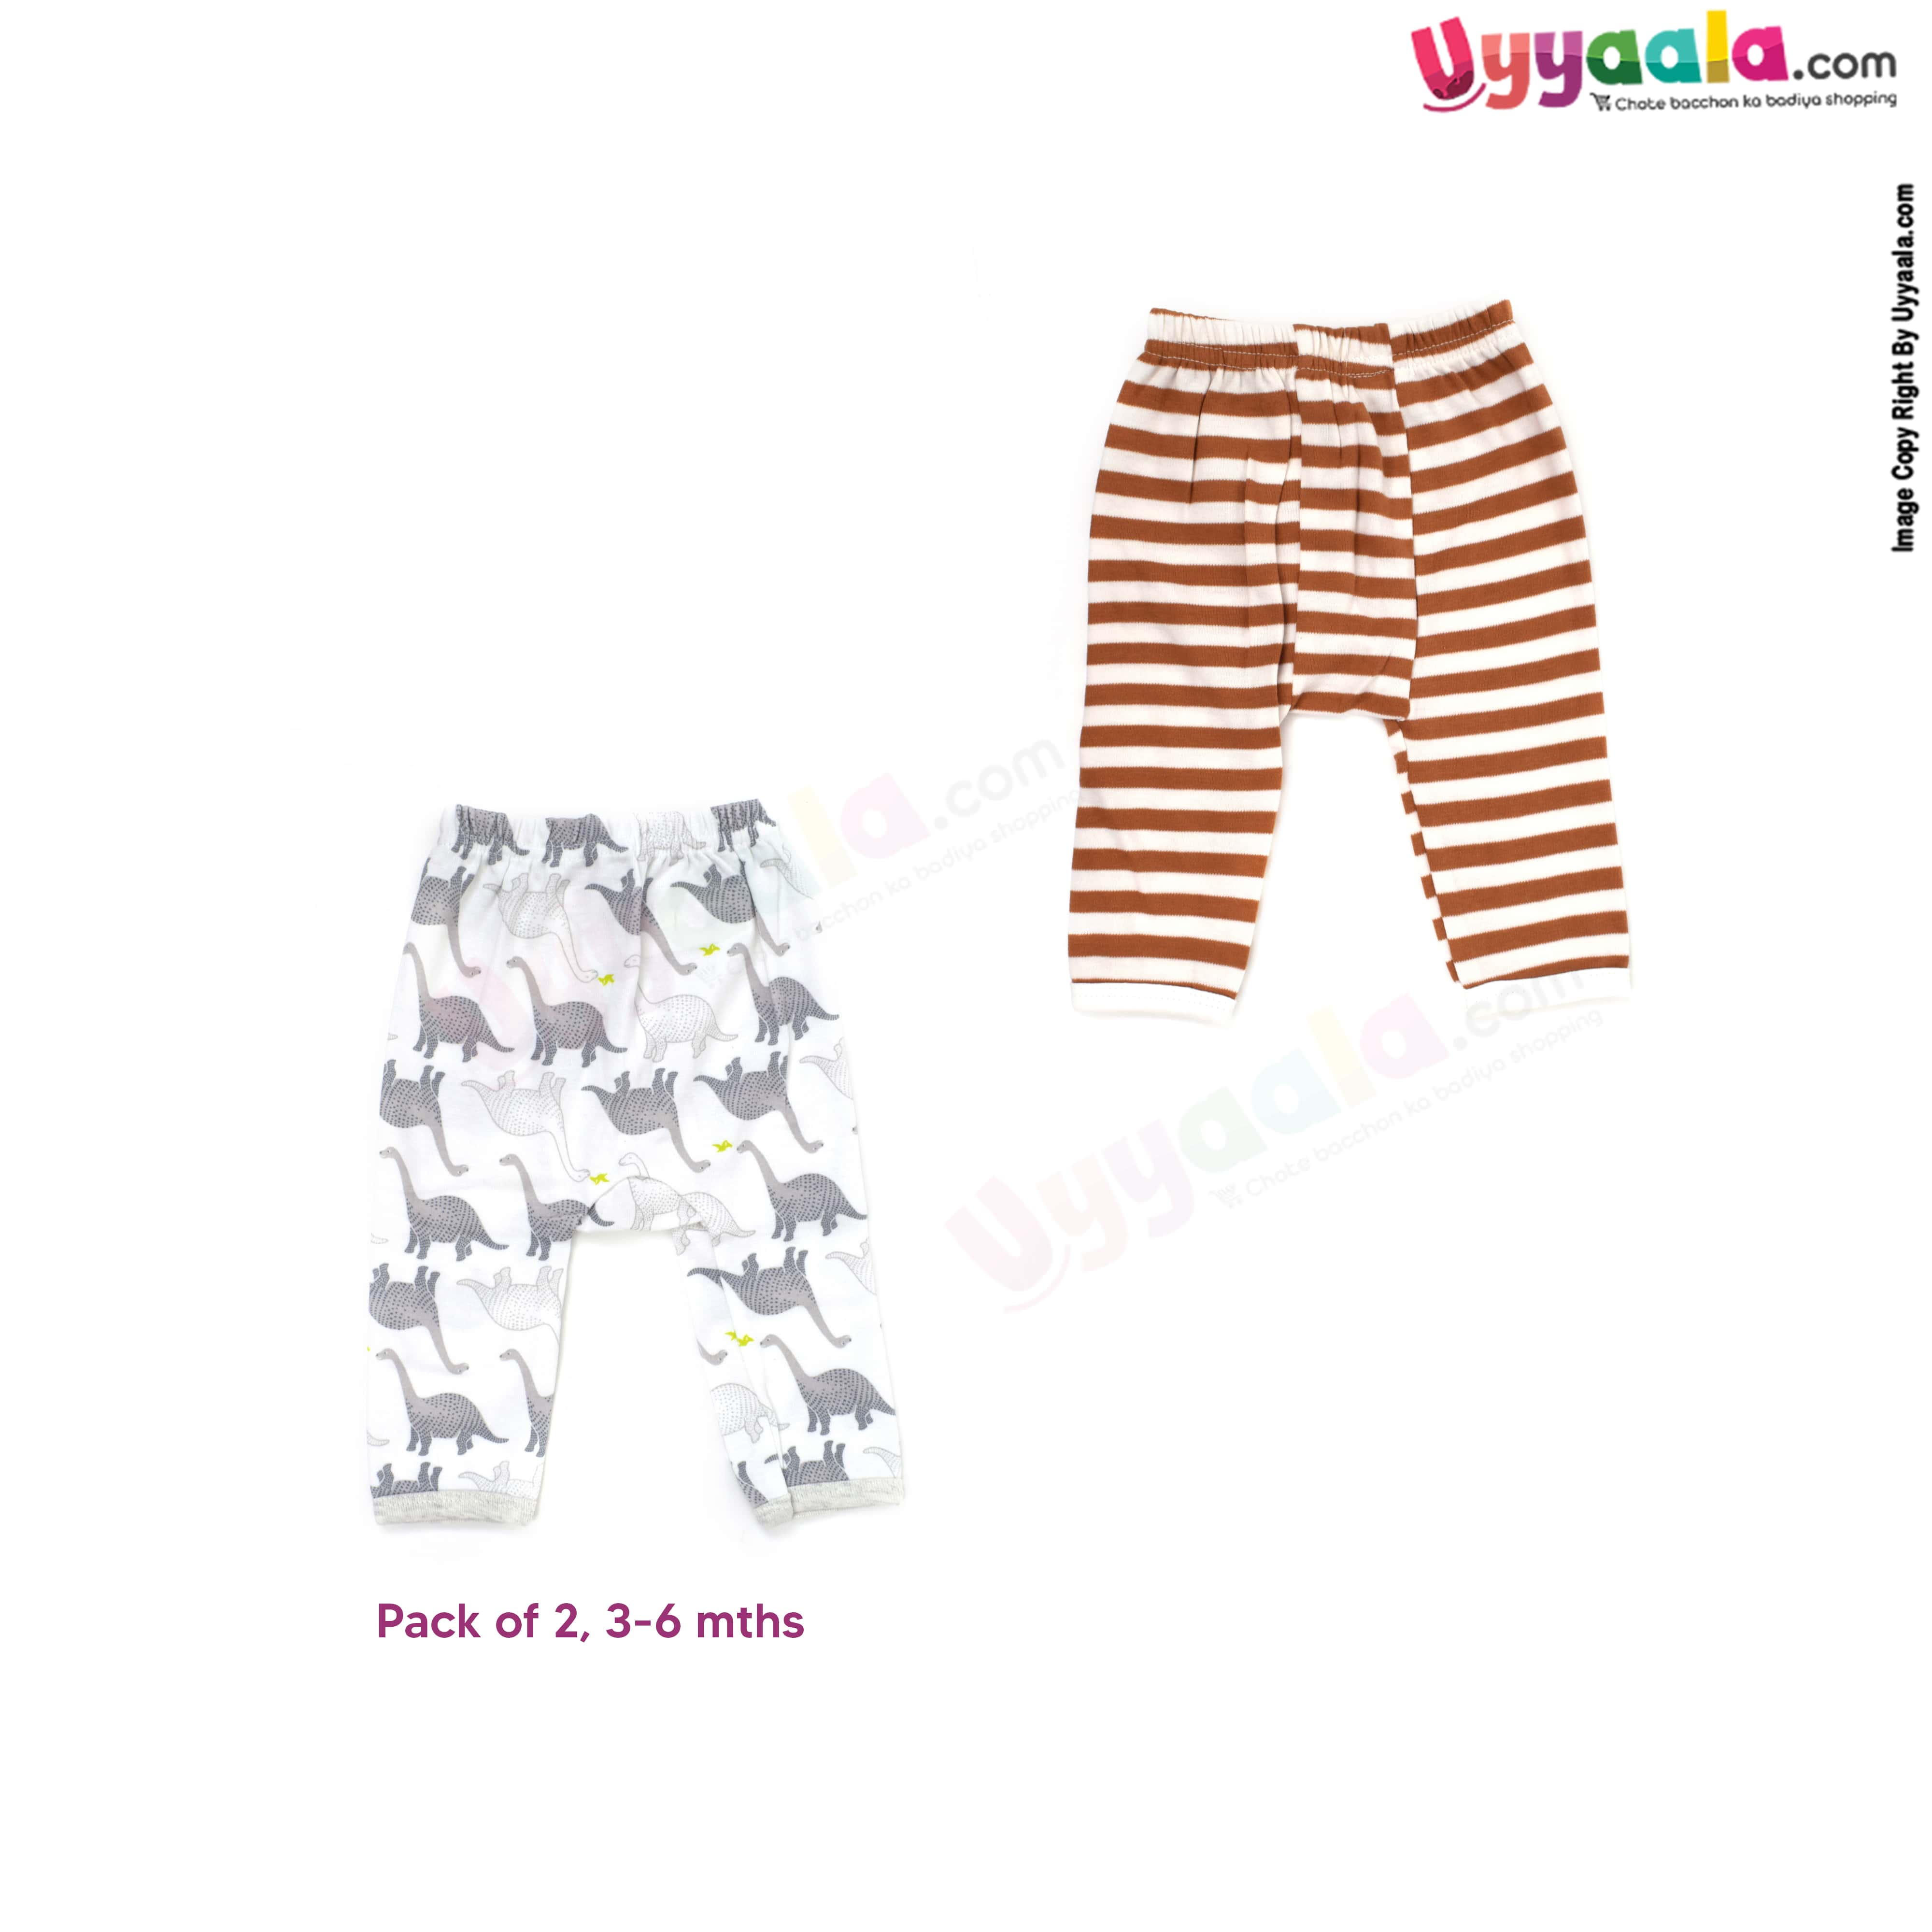 PRECIOUS ONE diaper pants 100% soft hosiery cotton pack of 2 - white with dinosaurs & brown with cream stripes prints (3-6m)